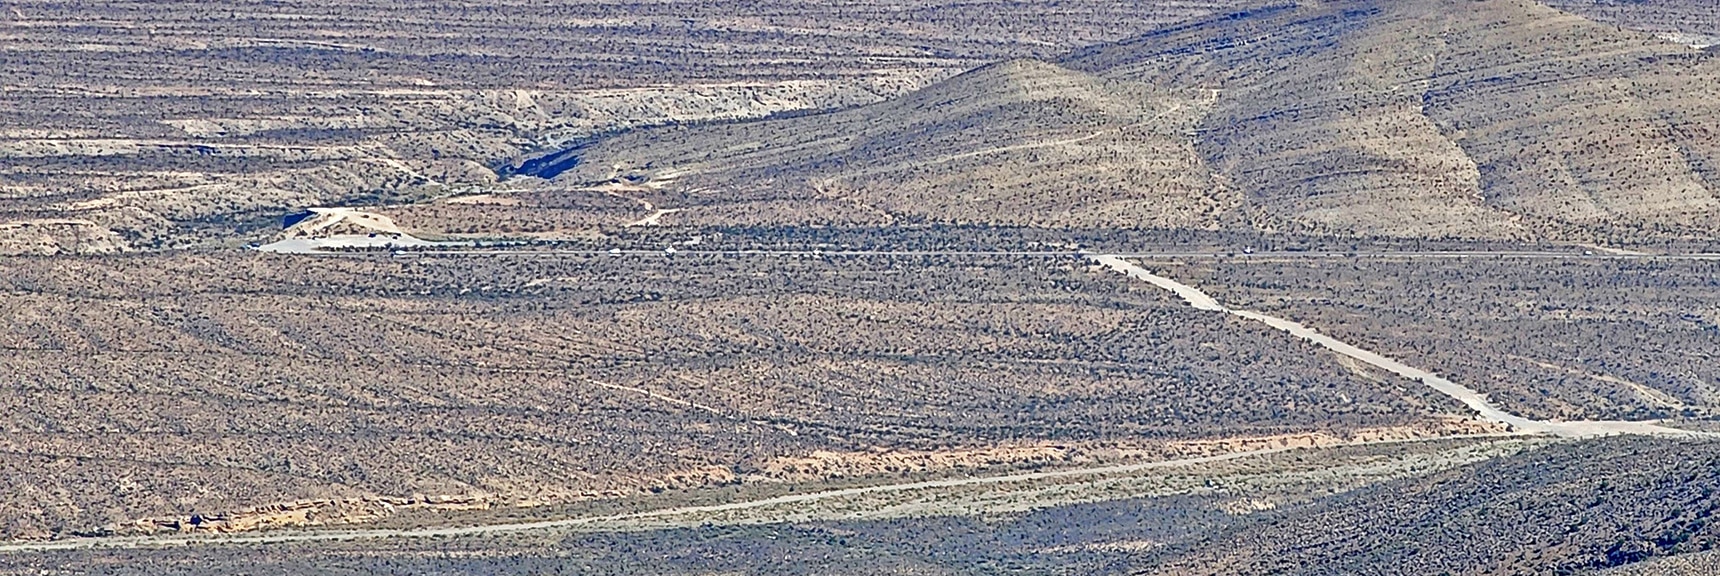 Larger View of Straight Rd Ending at Kyle Canyon Rd. Car Parked in Graveled Area to Left | Kyle Canyon Grand Crossing | Northern Half | La Madre Mountains Wilderness, Nevada